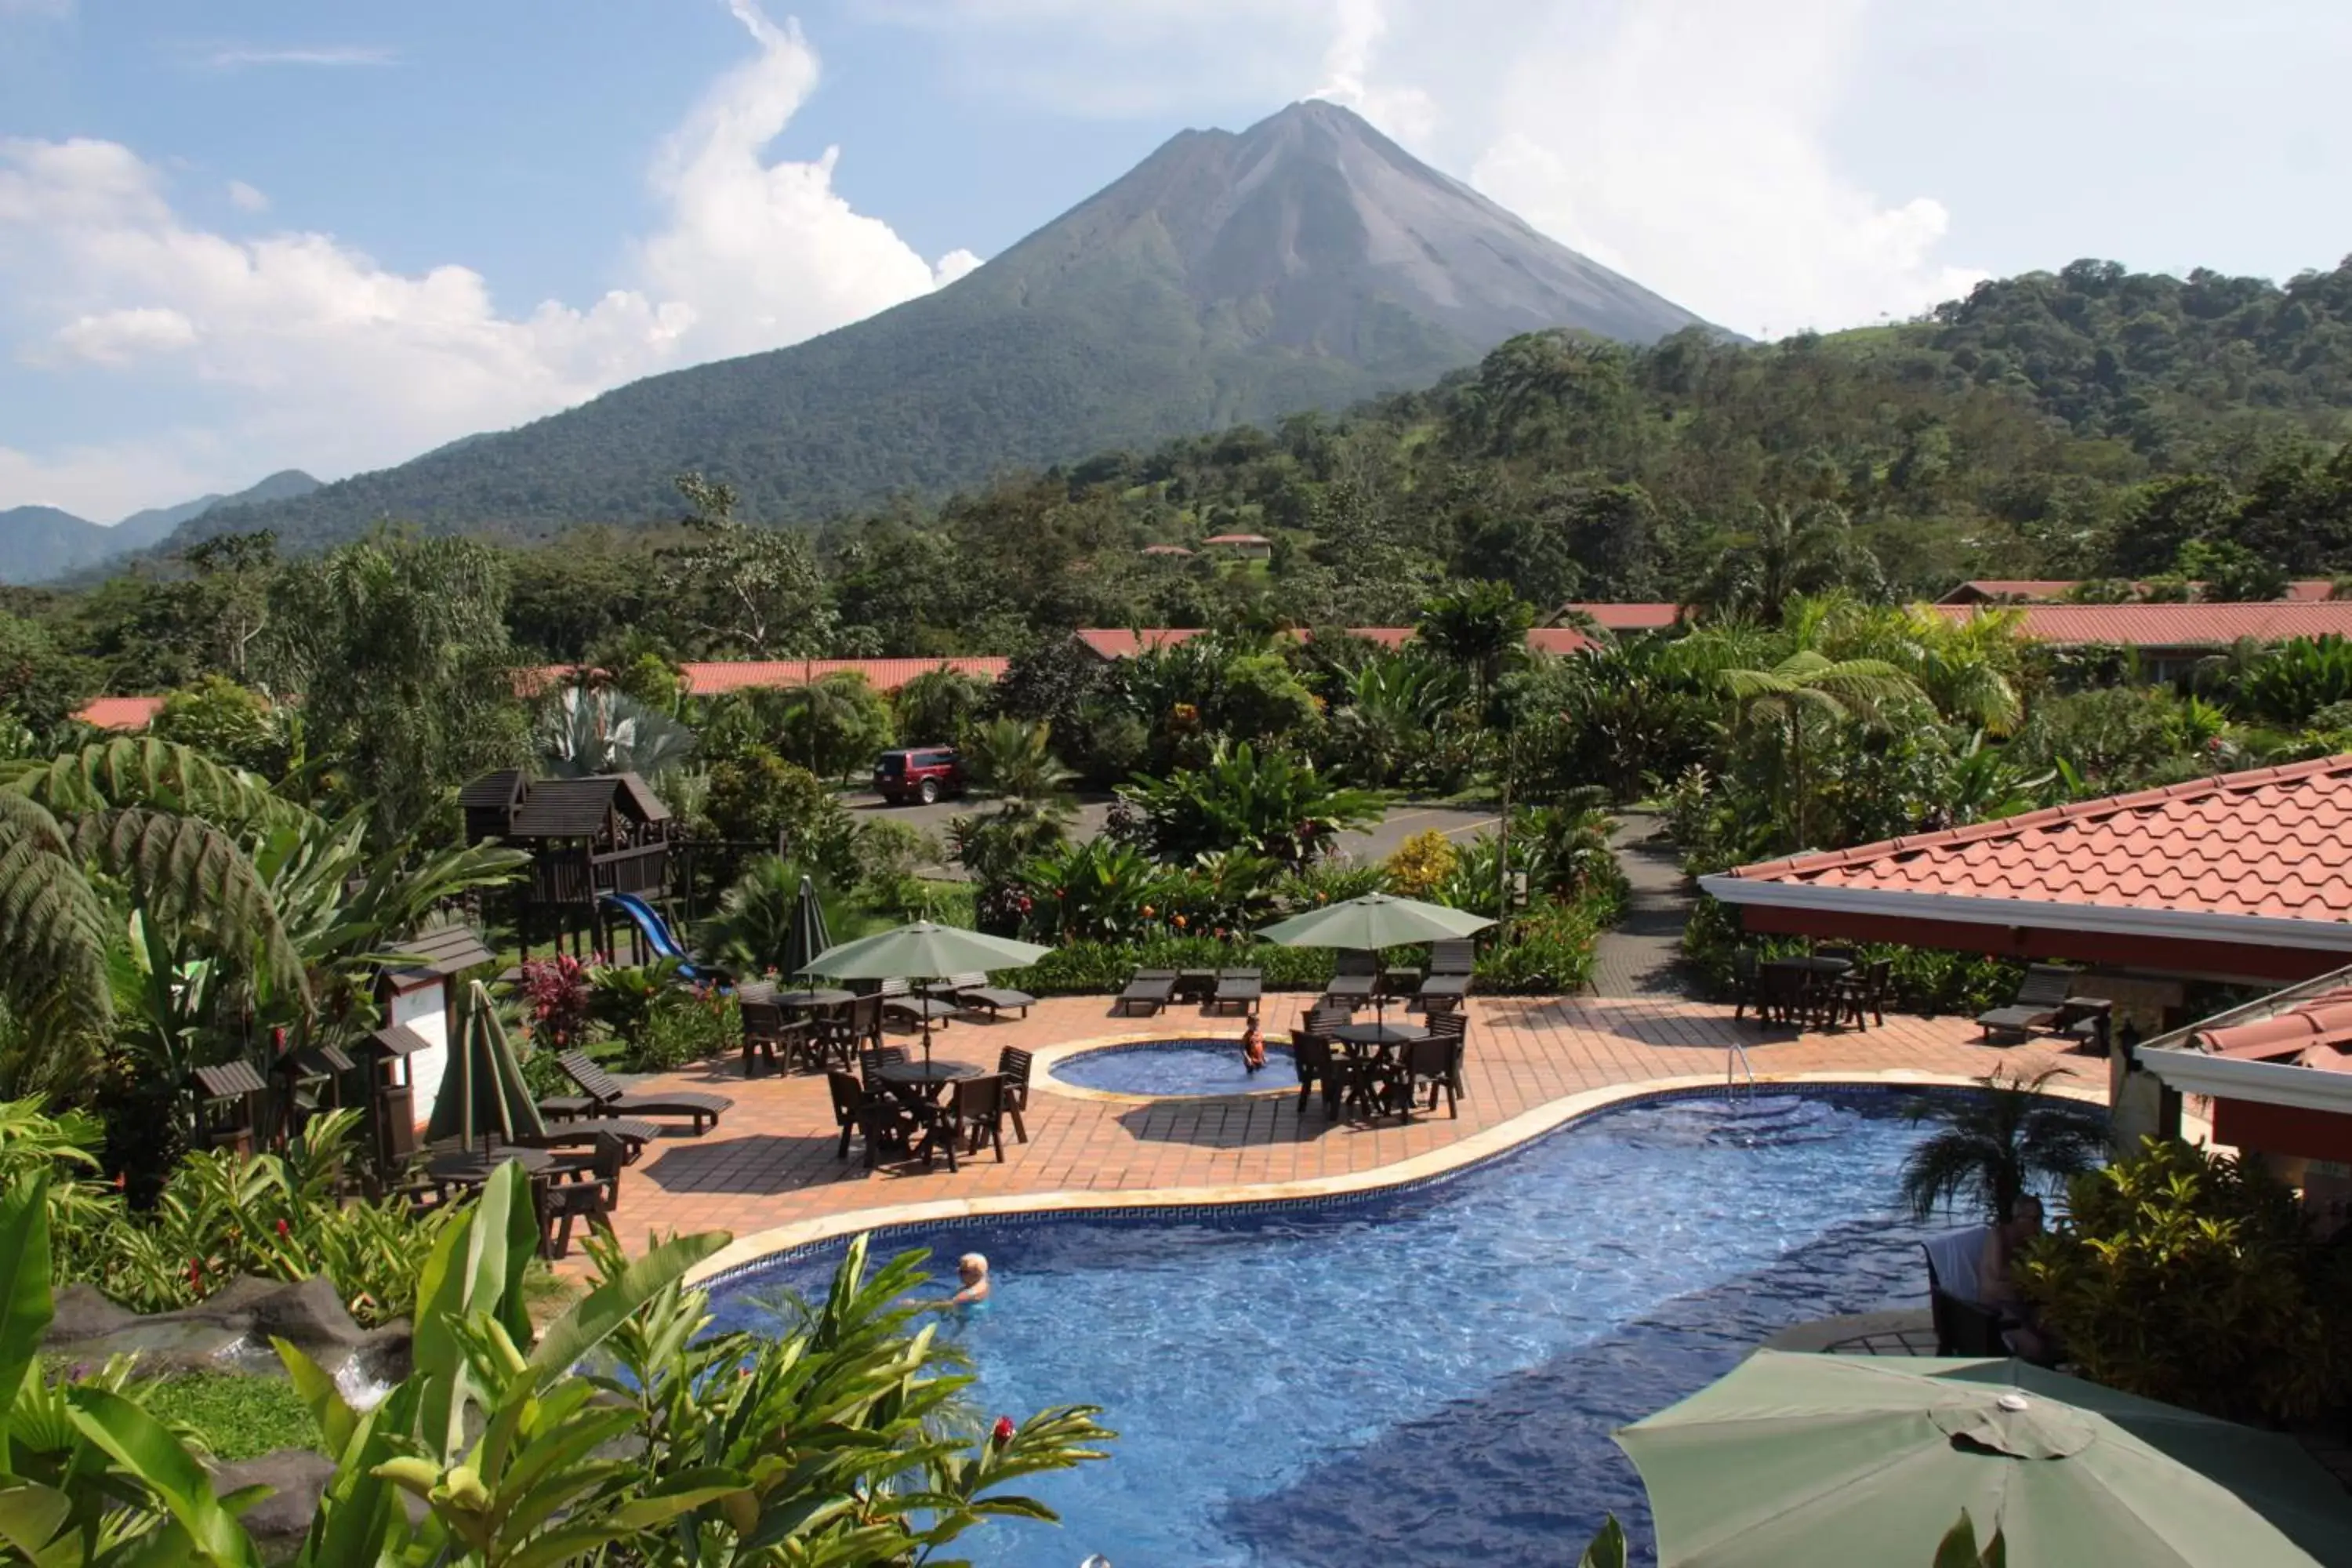 Bird's eye view, Pool View in Volcano Lodge, Hotel & Thermal Experience